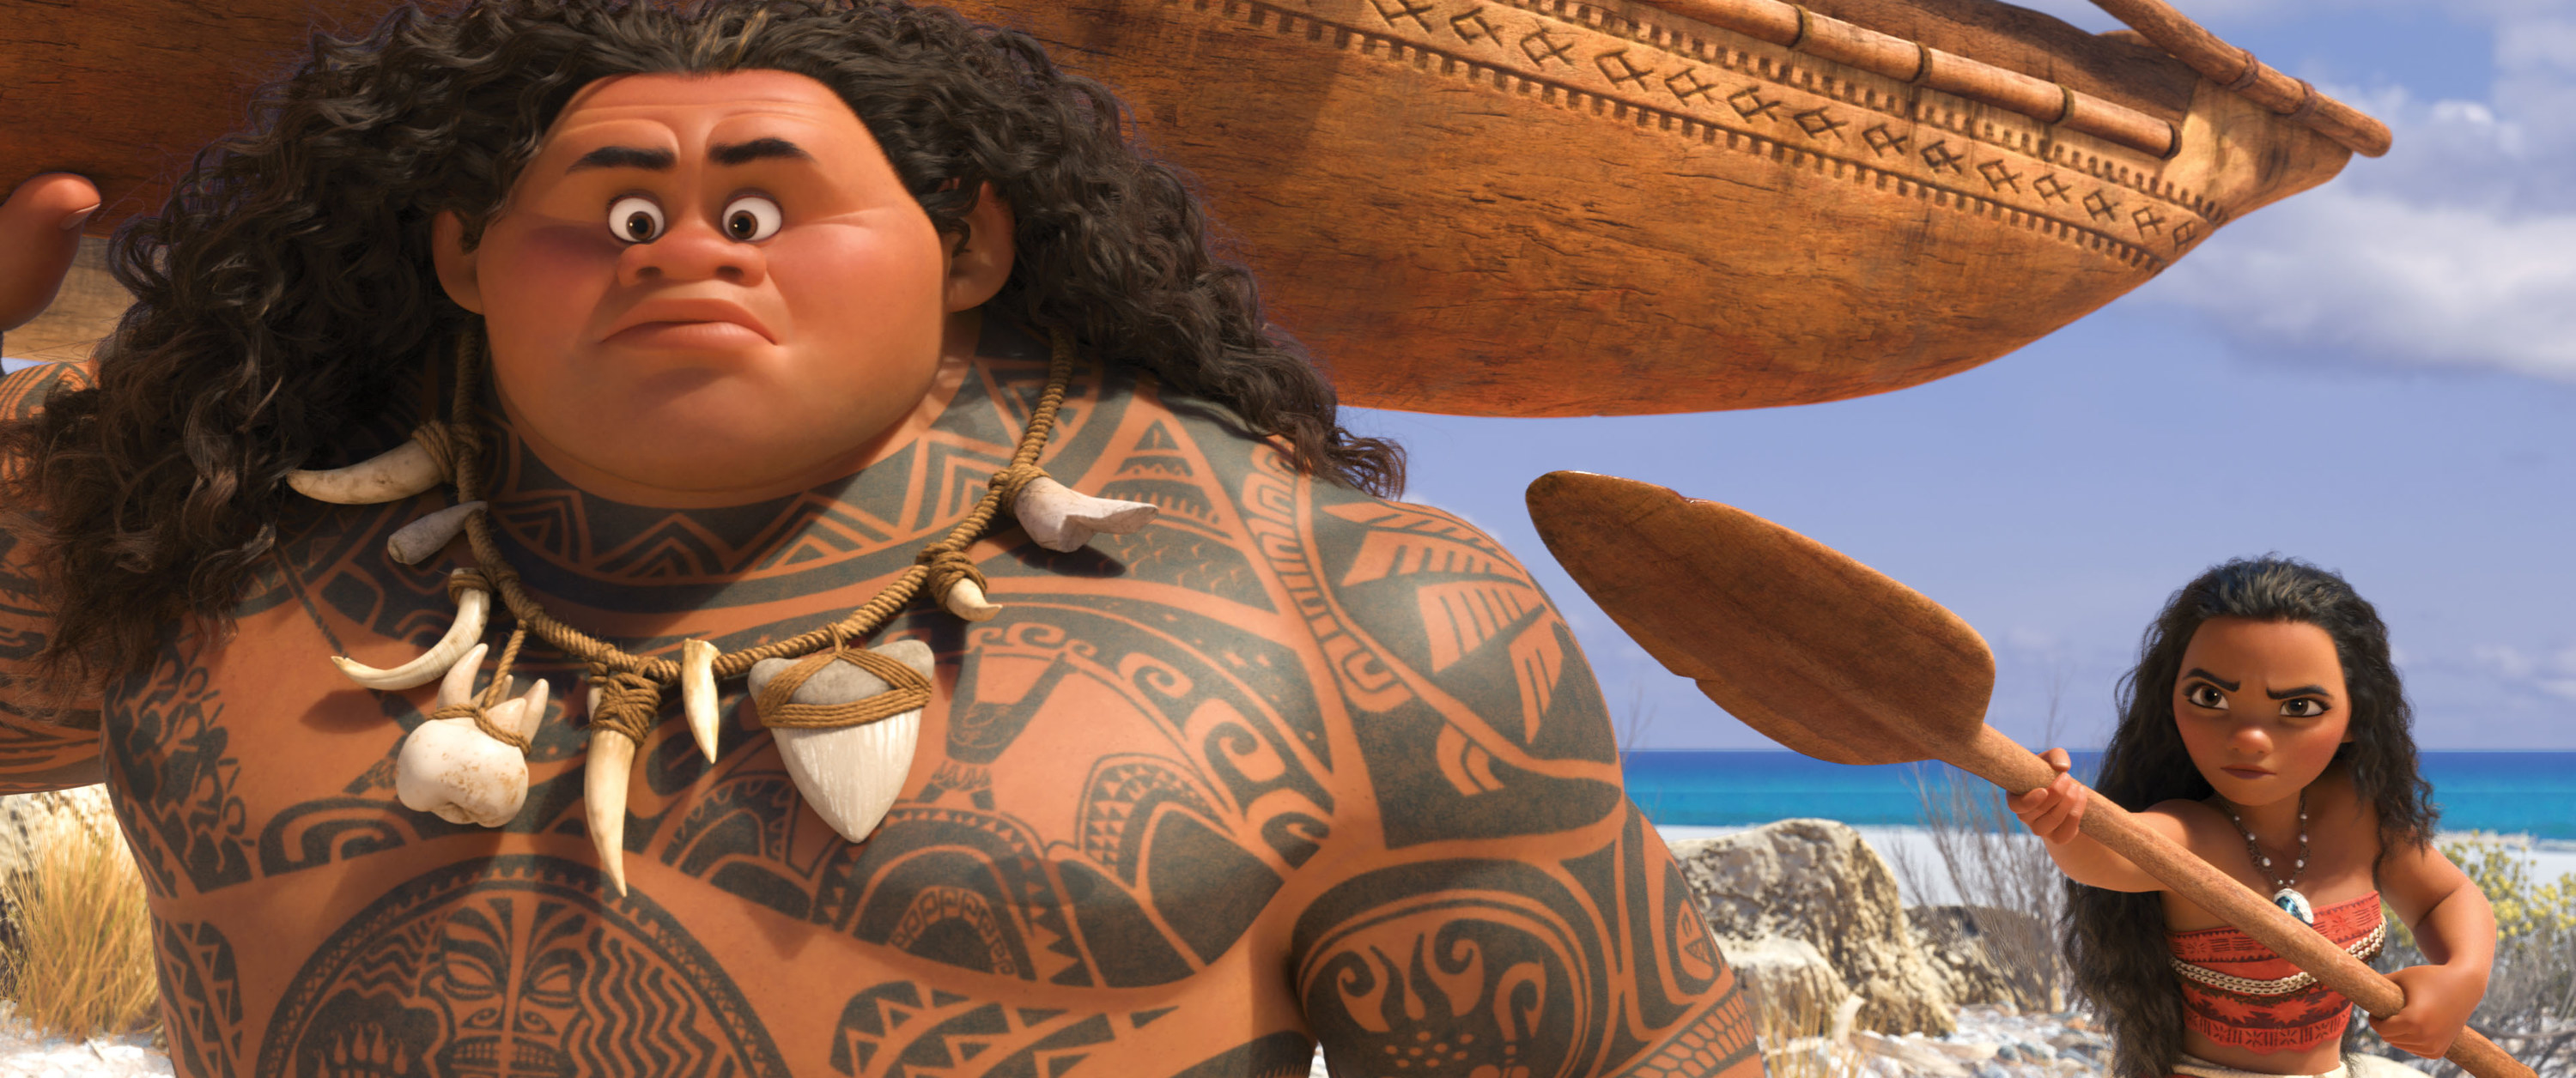 maui with moana standing behind him pointing an oar to him